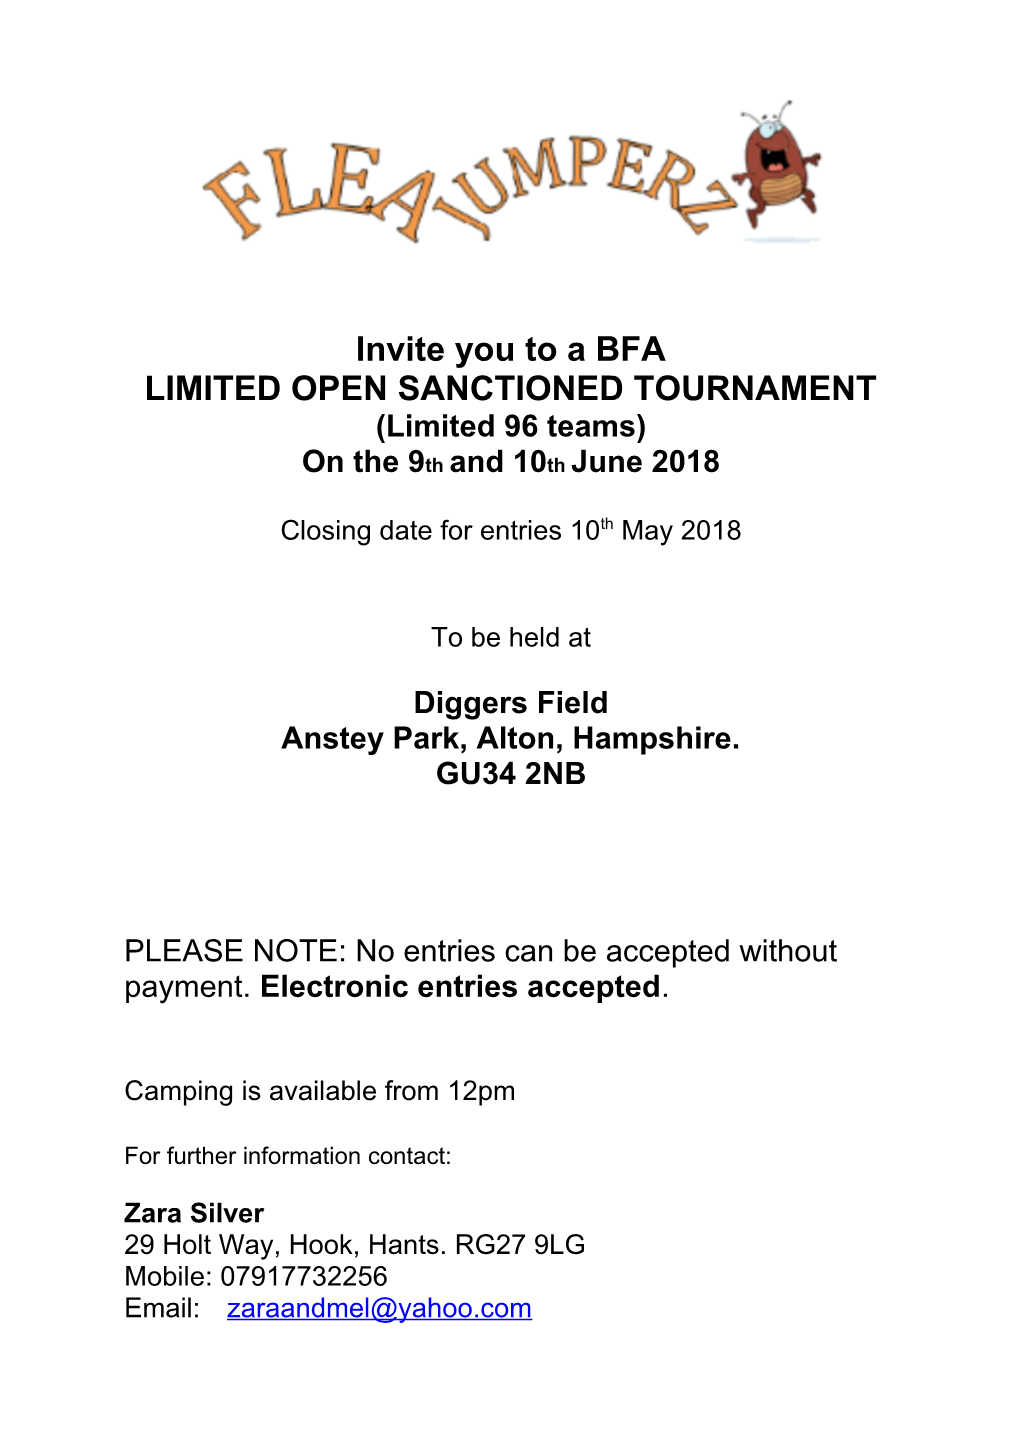 Limited Open Sanctioned Tournament